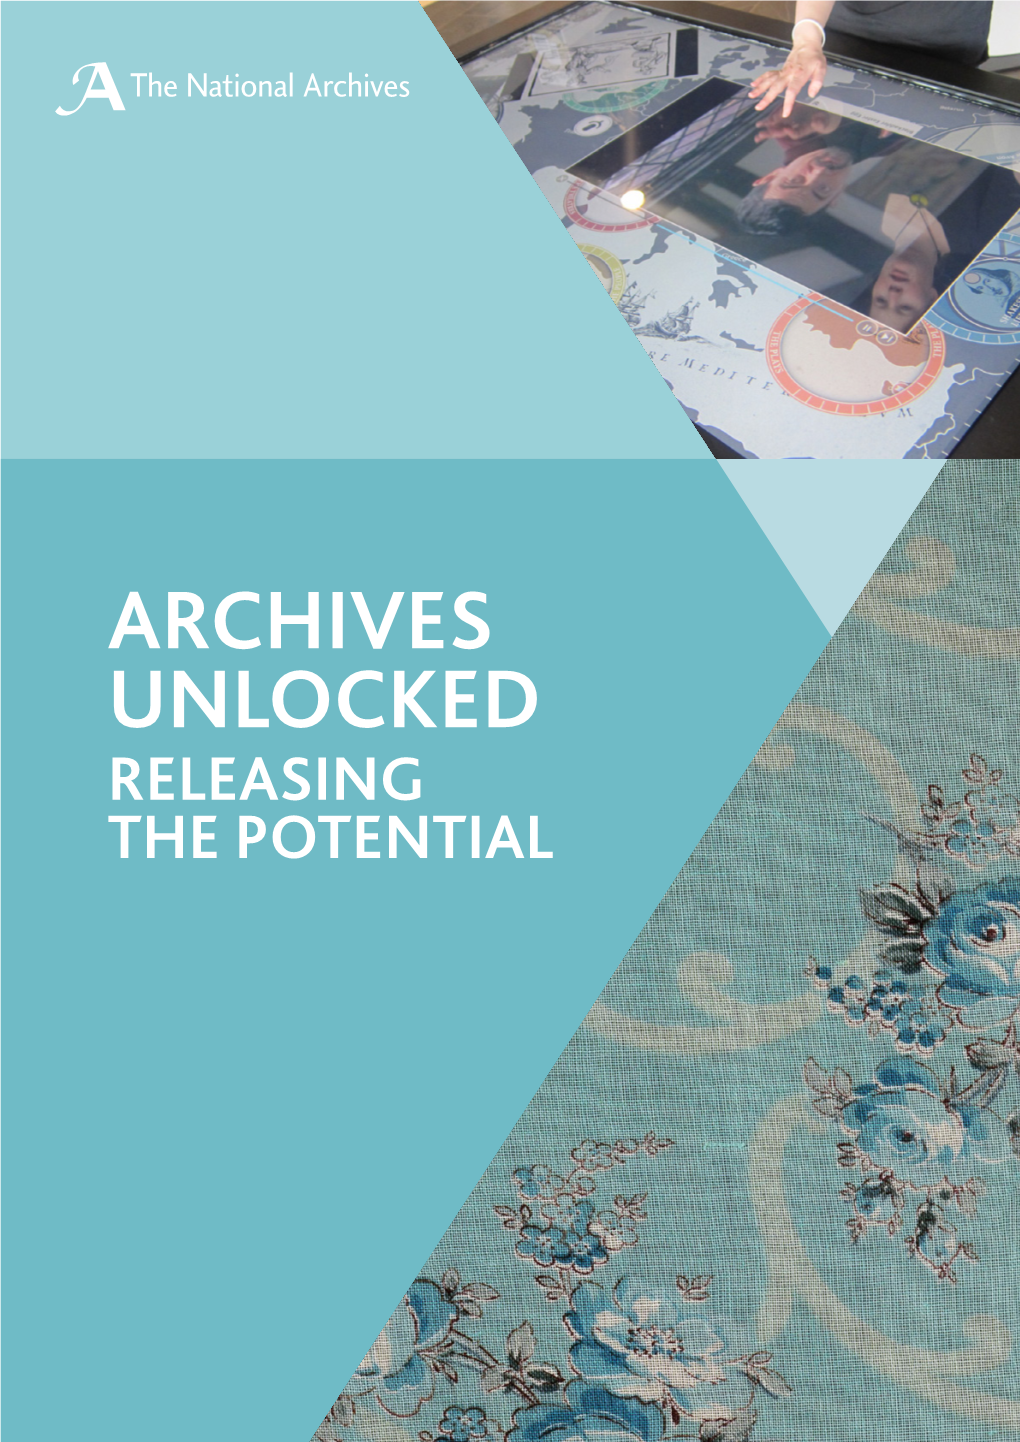 Archives Unlocked Releasing the Potential Releasing the Potential of Archives